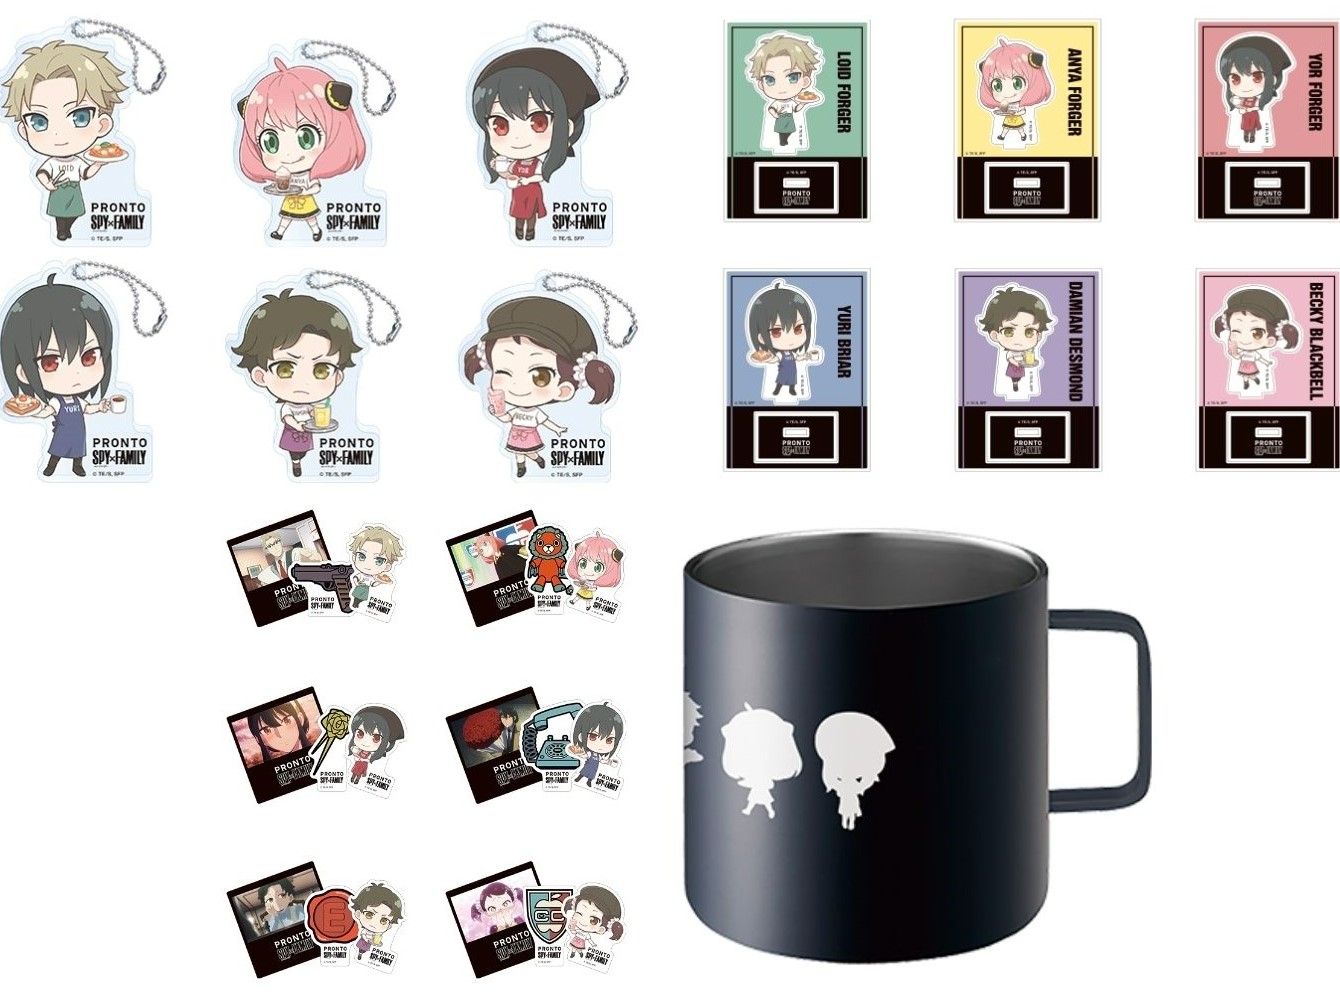 Pronto Cafe - spy x family merch consisting acrylic stands, acrylic keychains, thermo mugs and, sticker sets